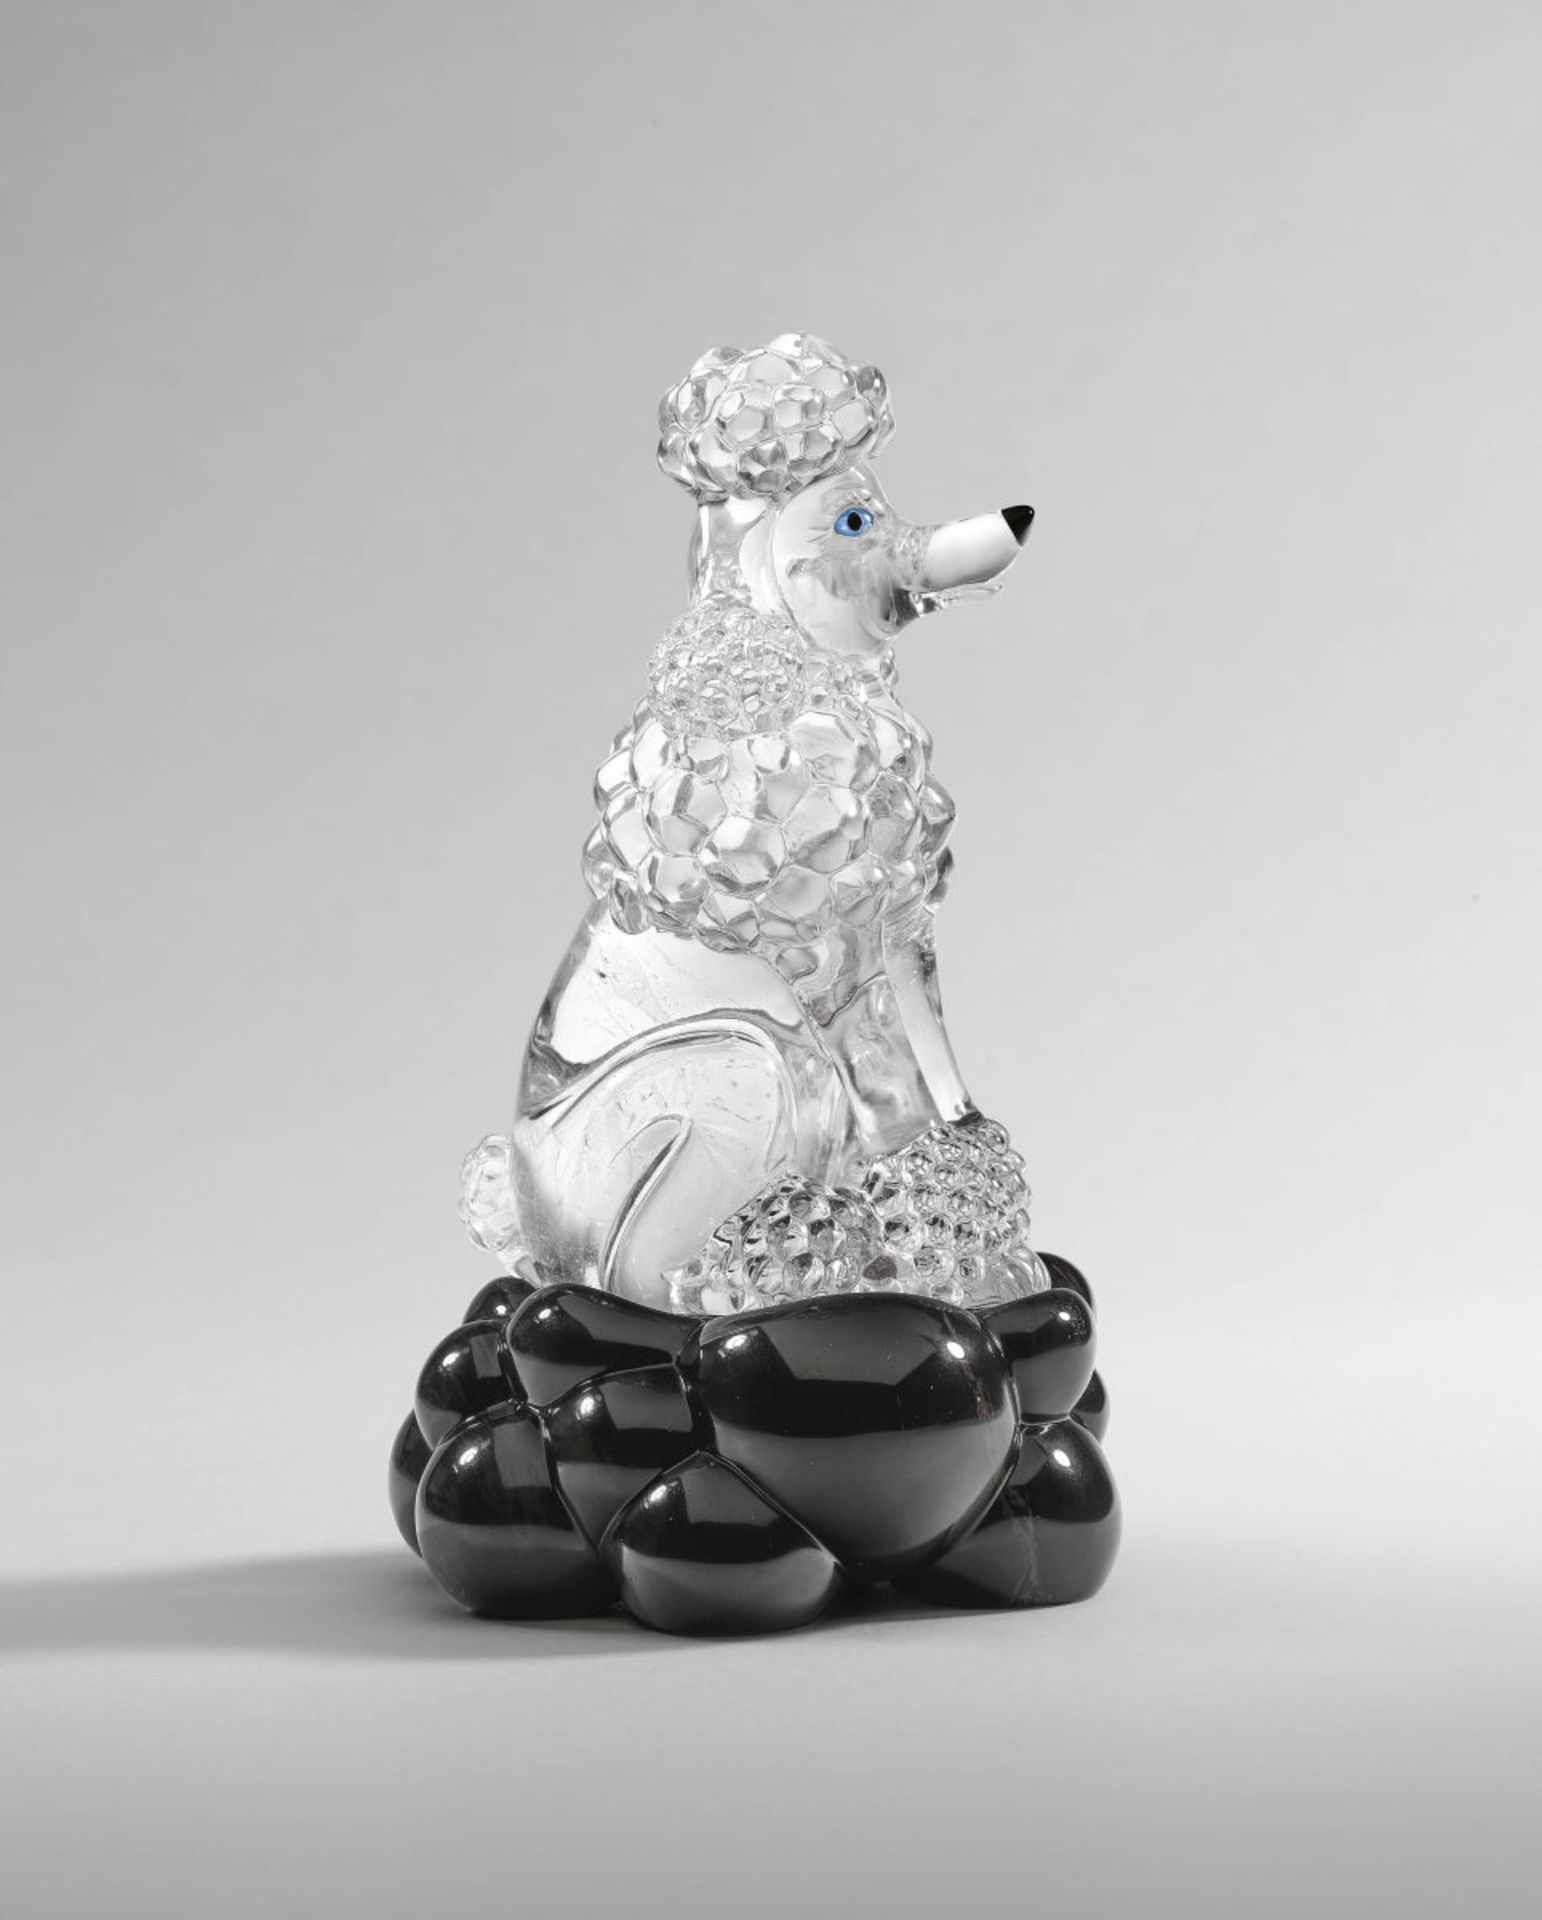 A Precious Stone engraved Ornament: Polar Bear on and Ice Floe - There is no Planet B - Bild 2 aus 2